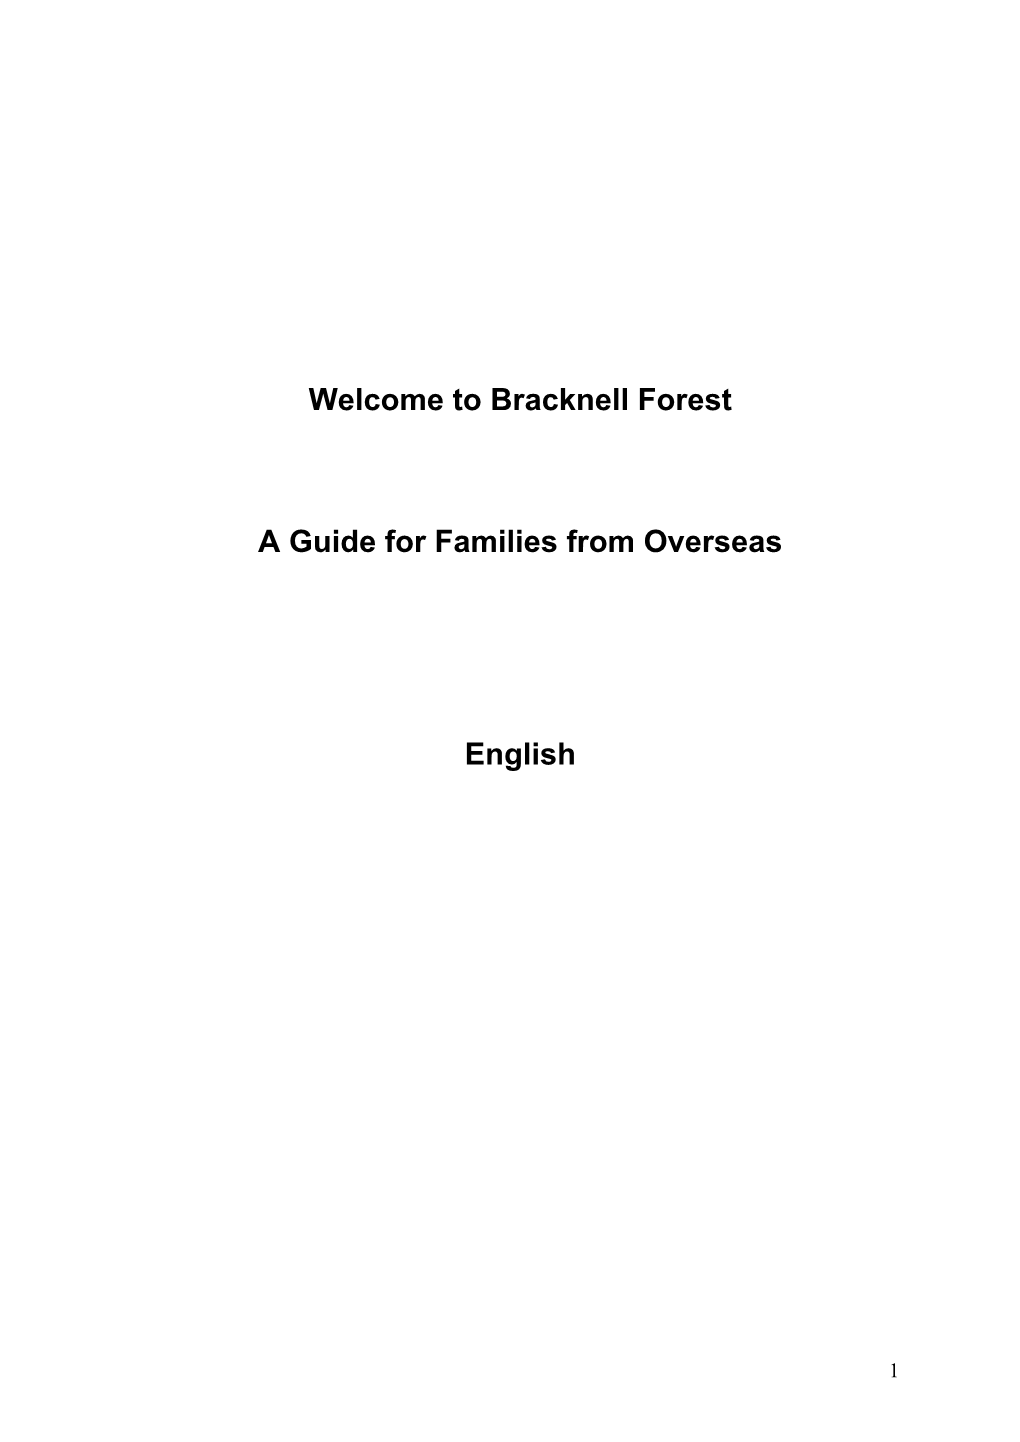 About Bracknell Forest